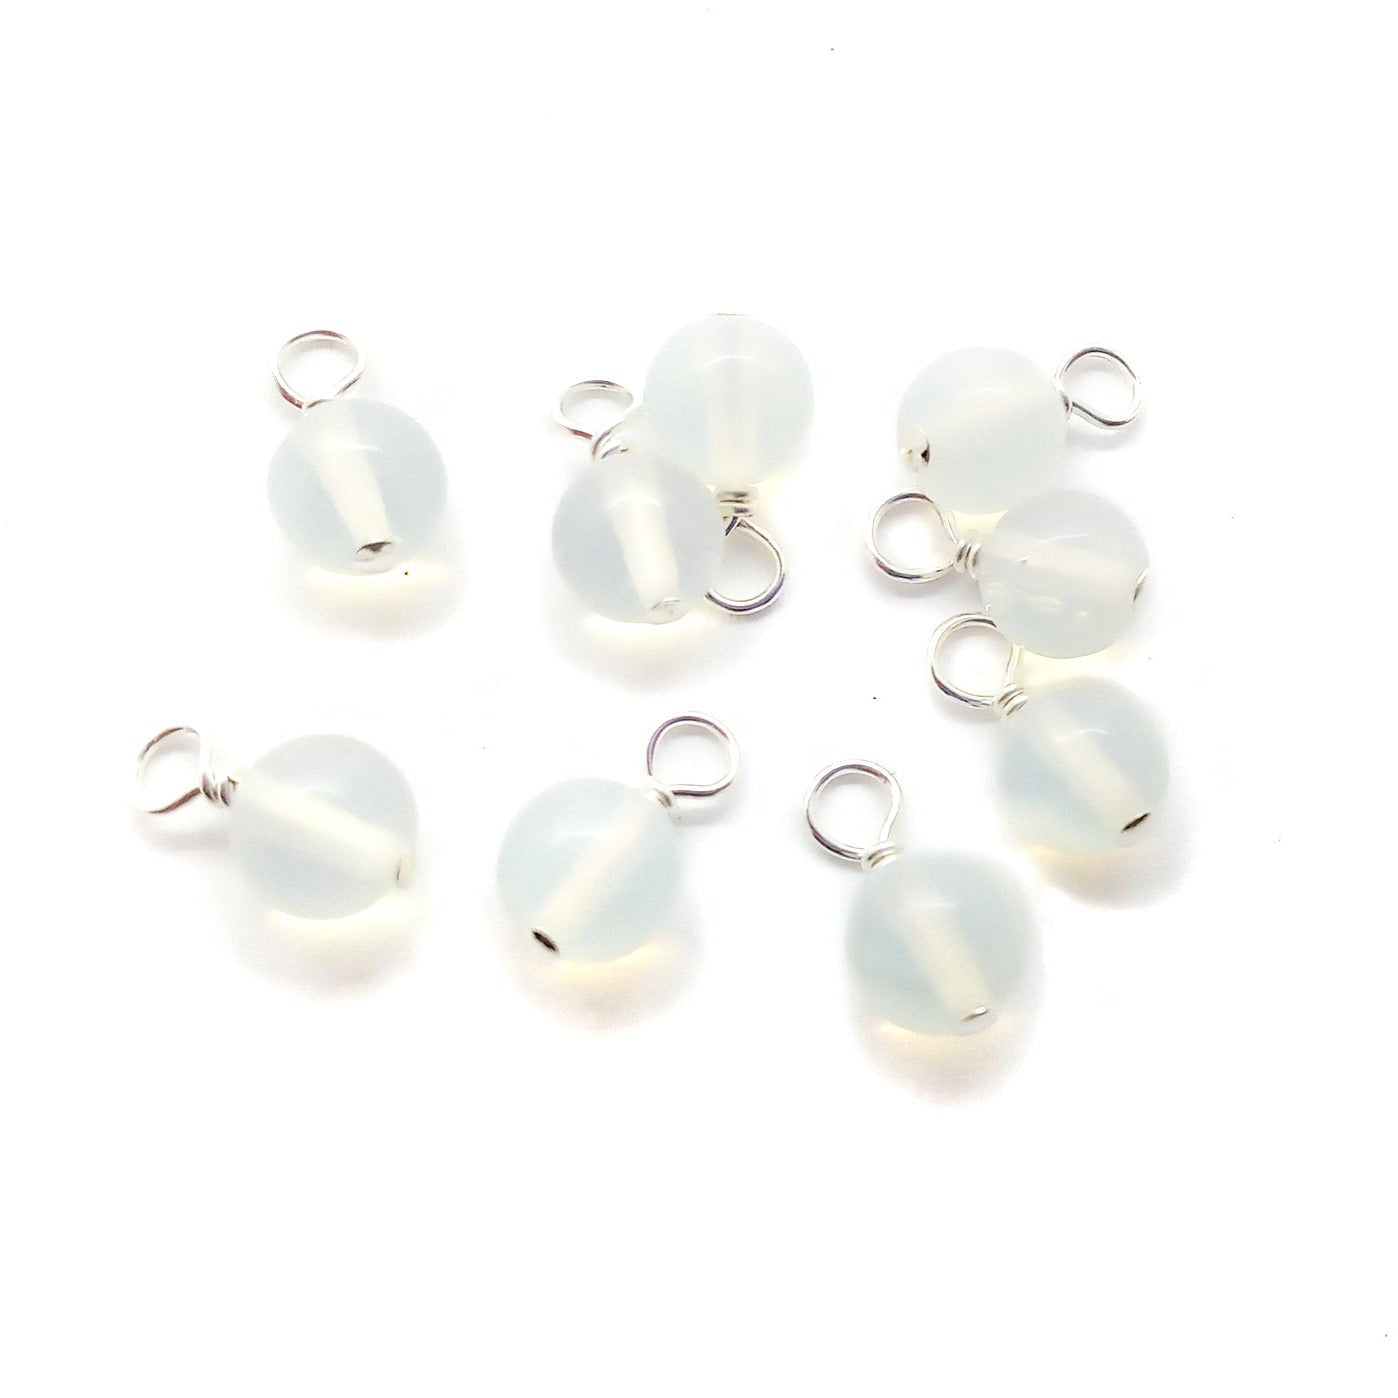 Opalite 6mm bead charm dangles for October birthstone.